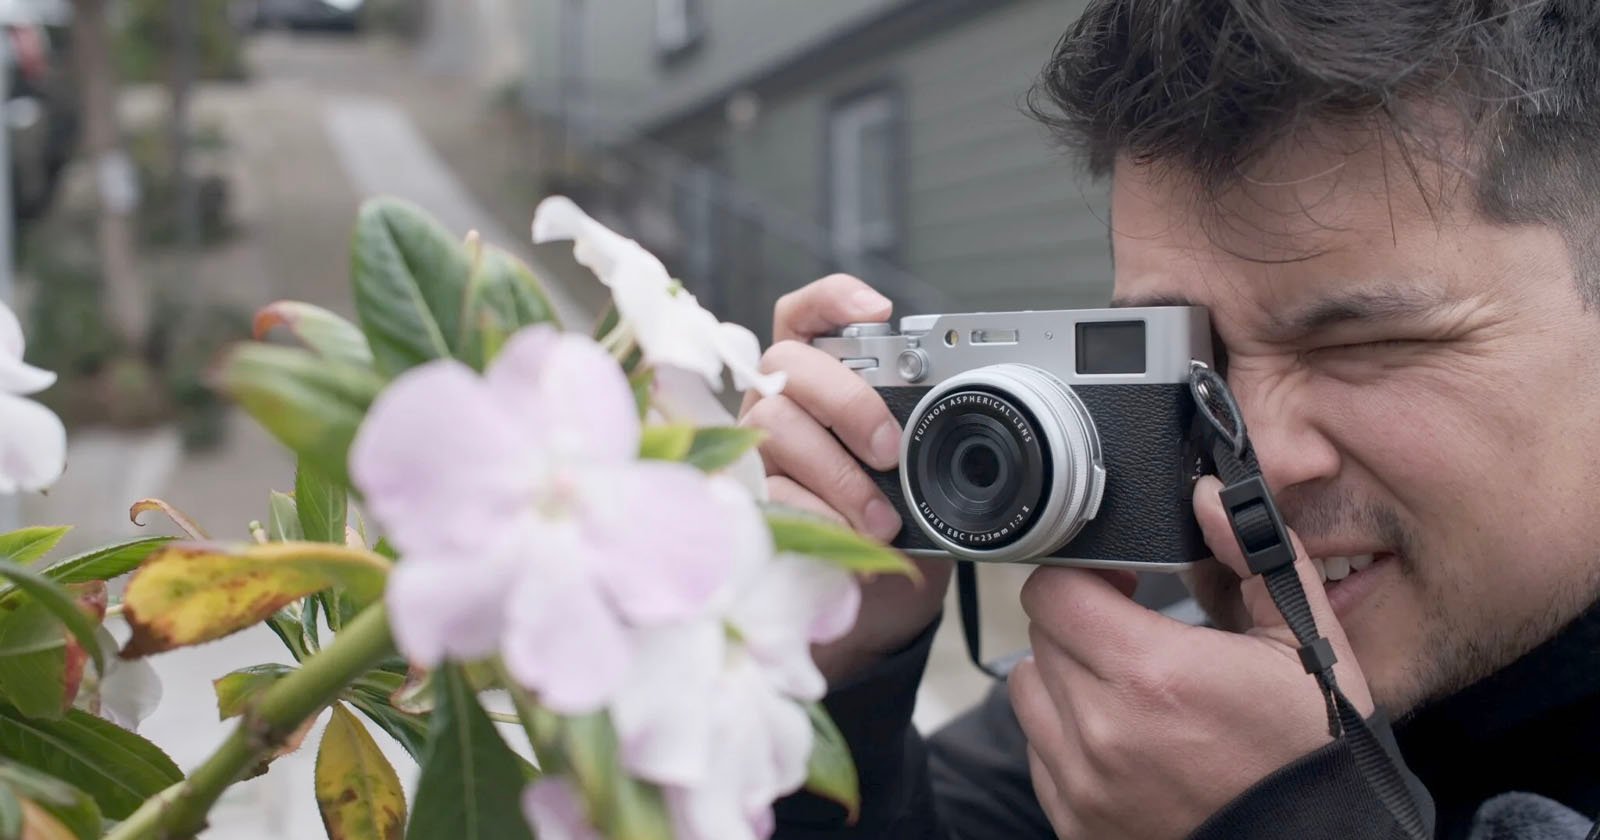 Fujifilms Camera Profits Soar on the Backs of Instax and the X100 Series